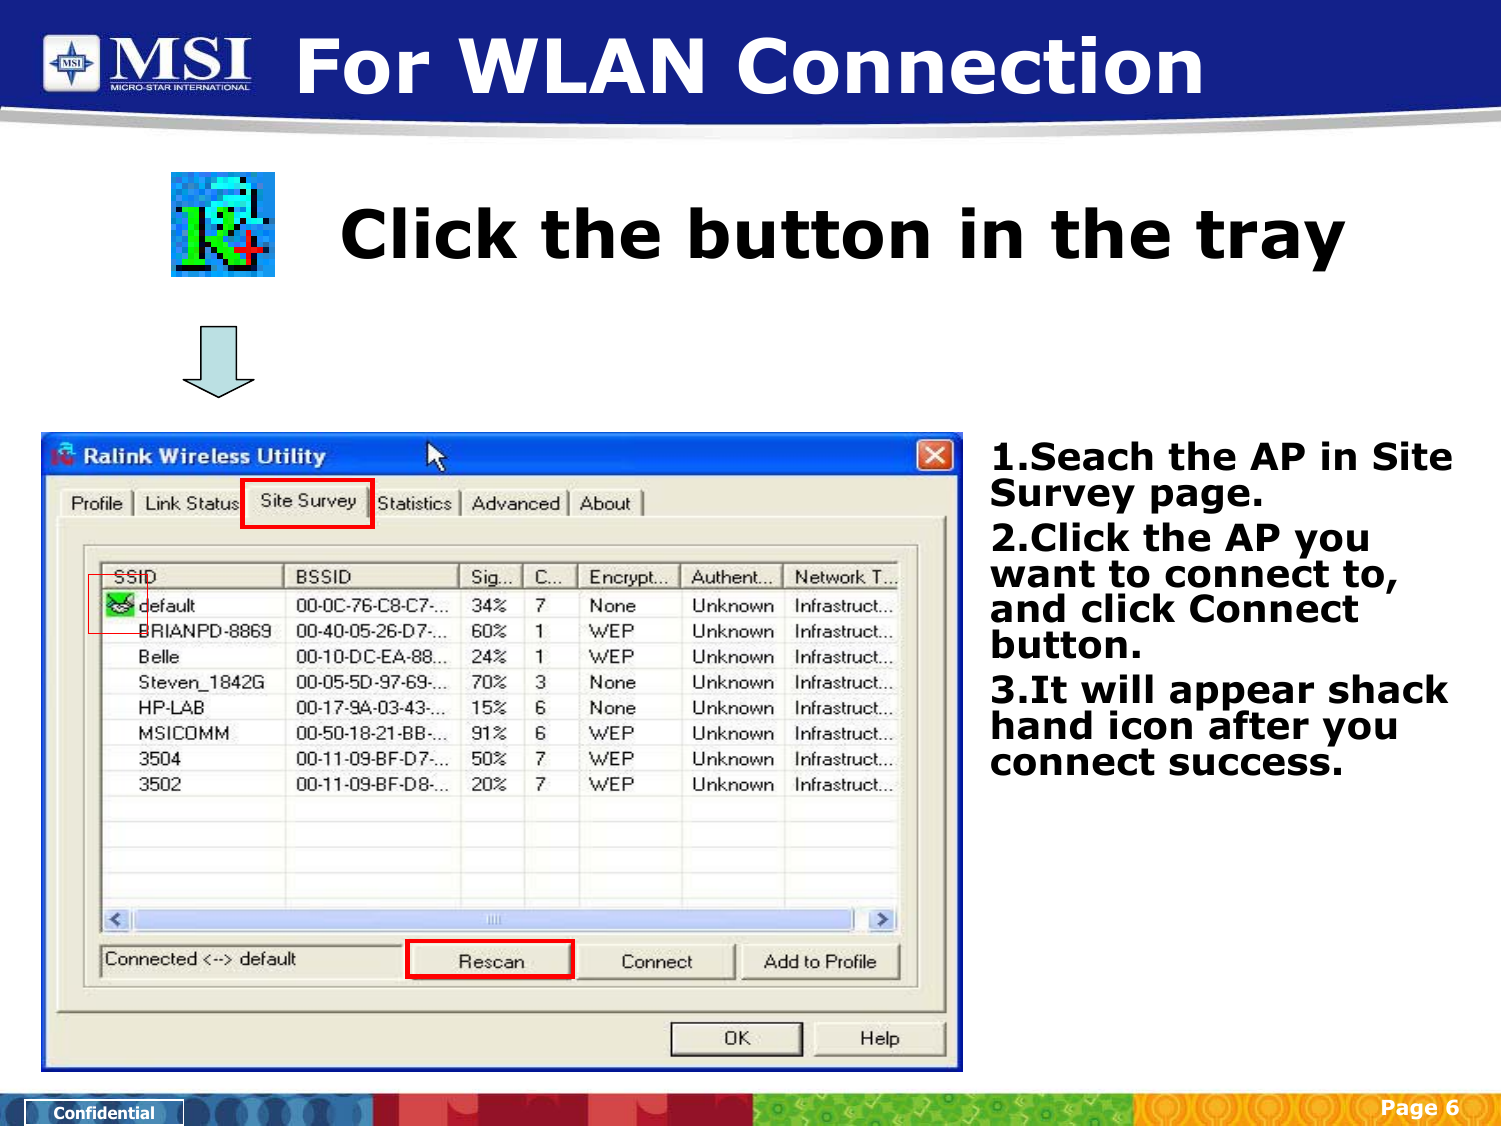 Page 6ConfidentialFor WLAN ConnectionClick the button in the tray1.Seach the AP in Site Survey page.2.Click the AP you want to connect to, and click Connect button.3.It will appear shack hand icon after you connect success.